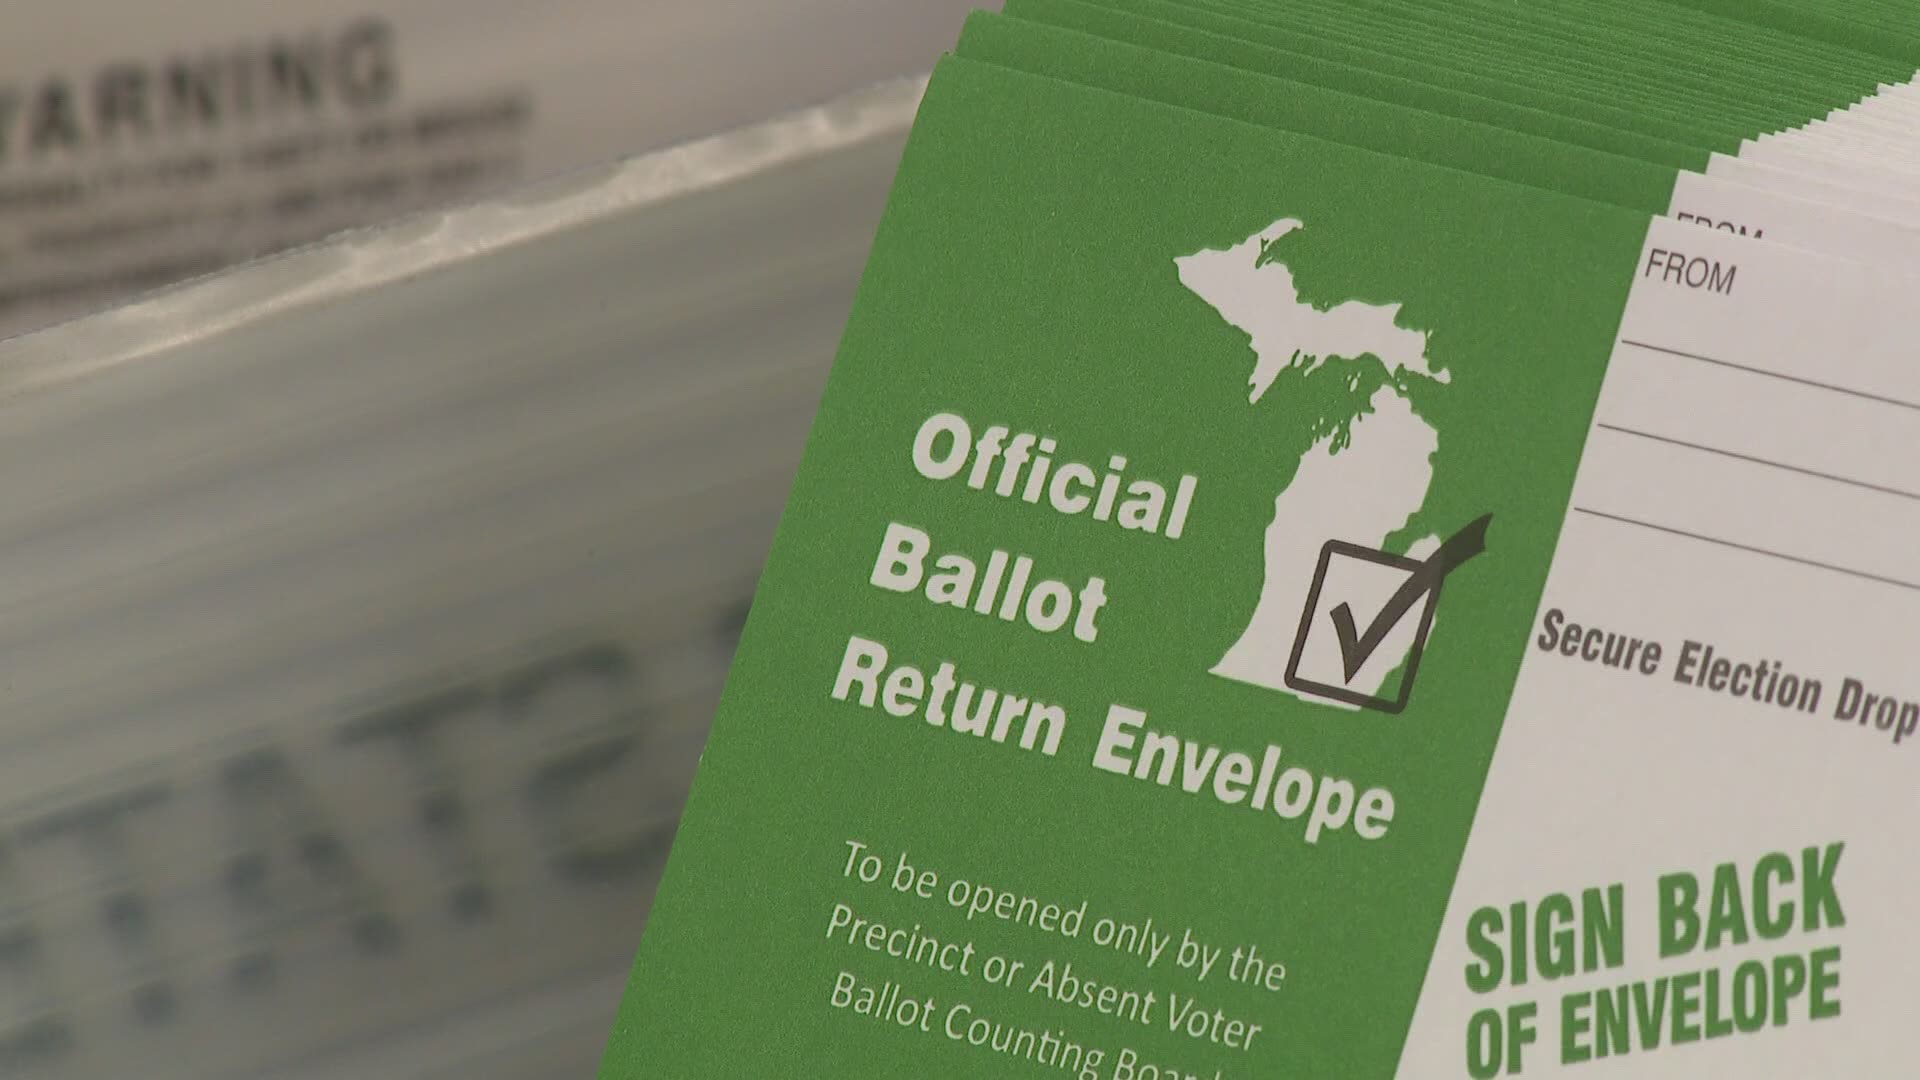 The Newaygo County clerk said he learned the unopposed race of the 78th district court judge was not on ballots already sent out. They will need to be reprinted.